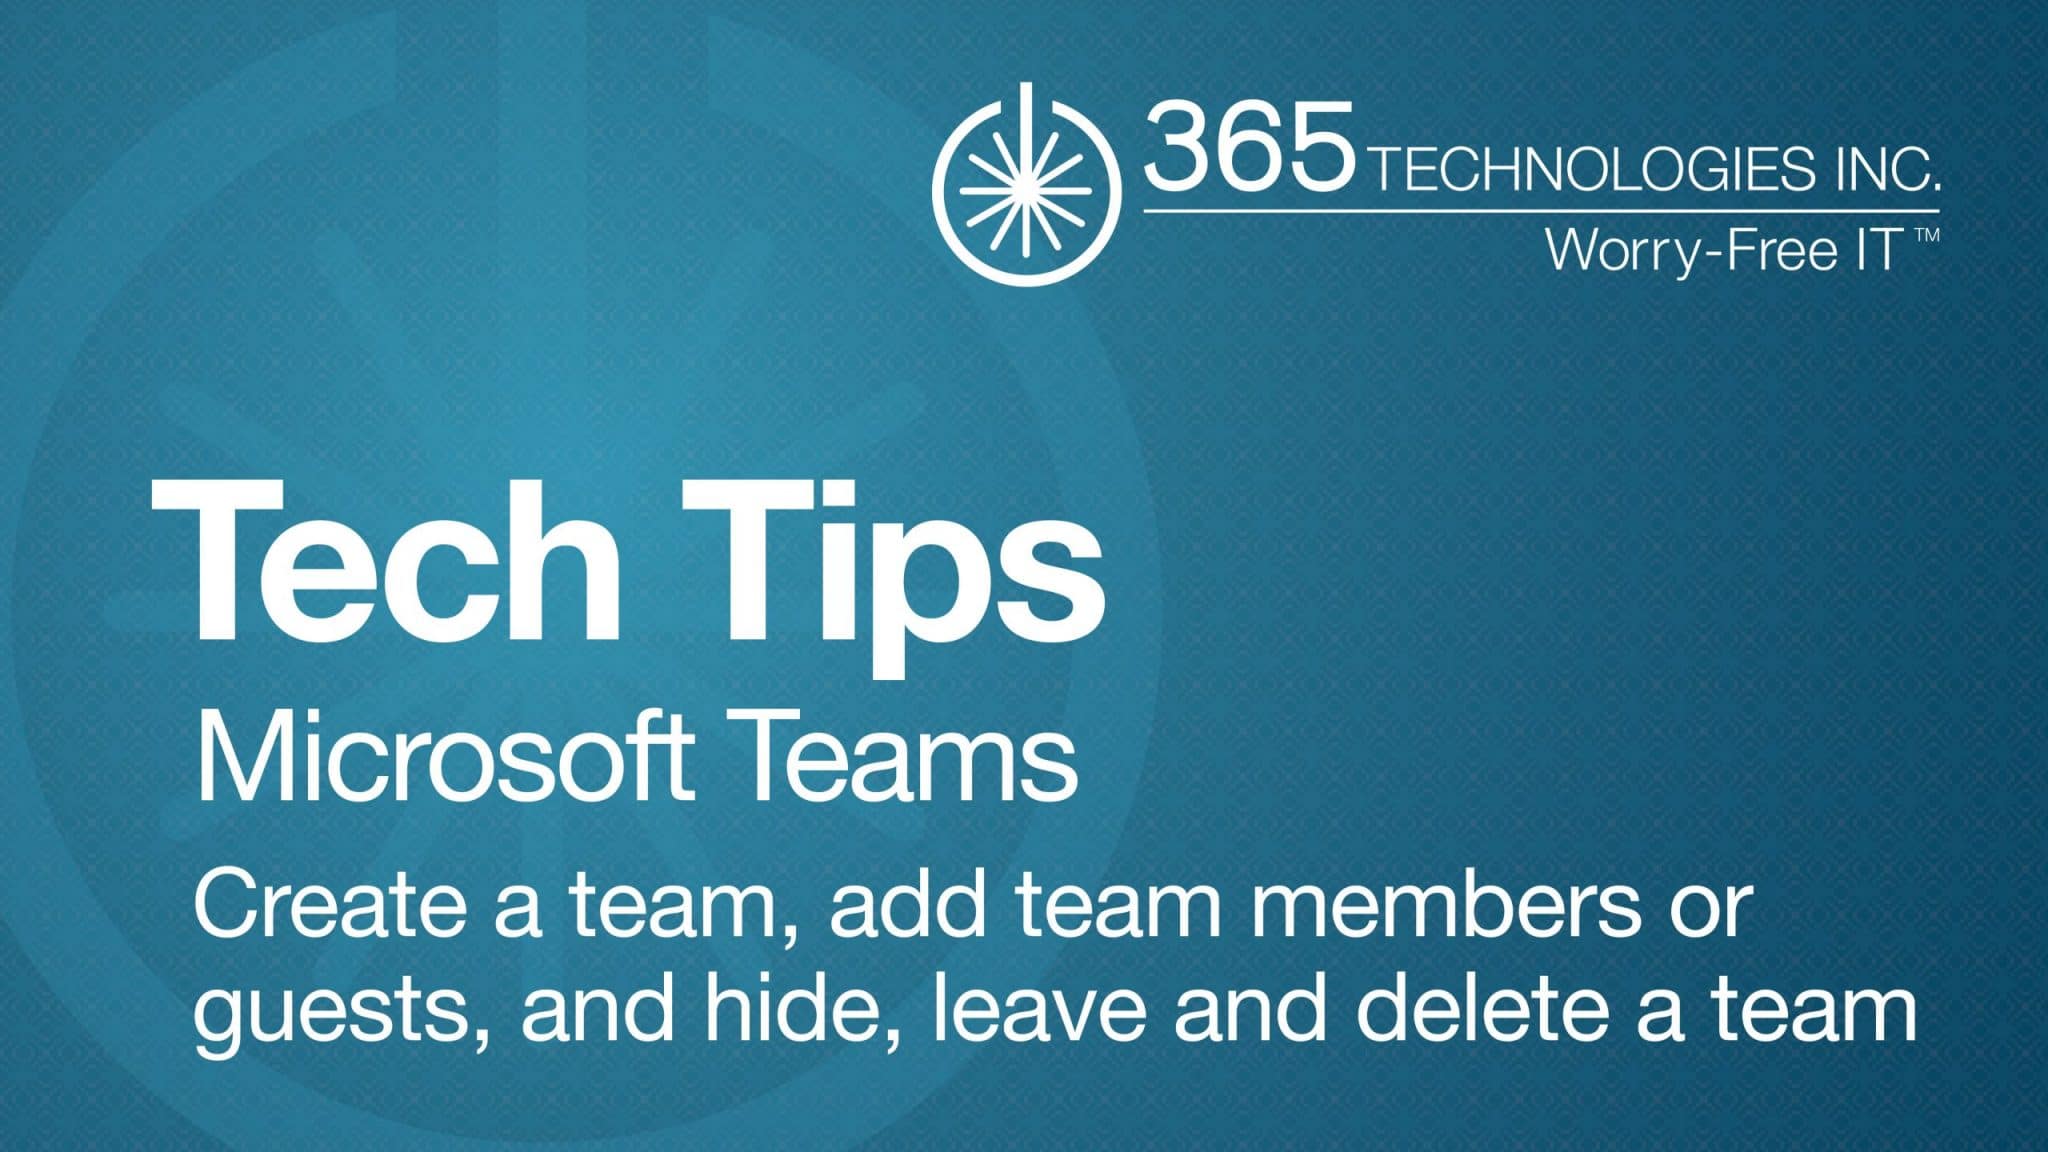 Microsoft Teams Tech Tips: How to create a team, add team members and guests